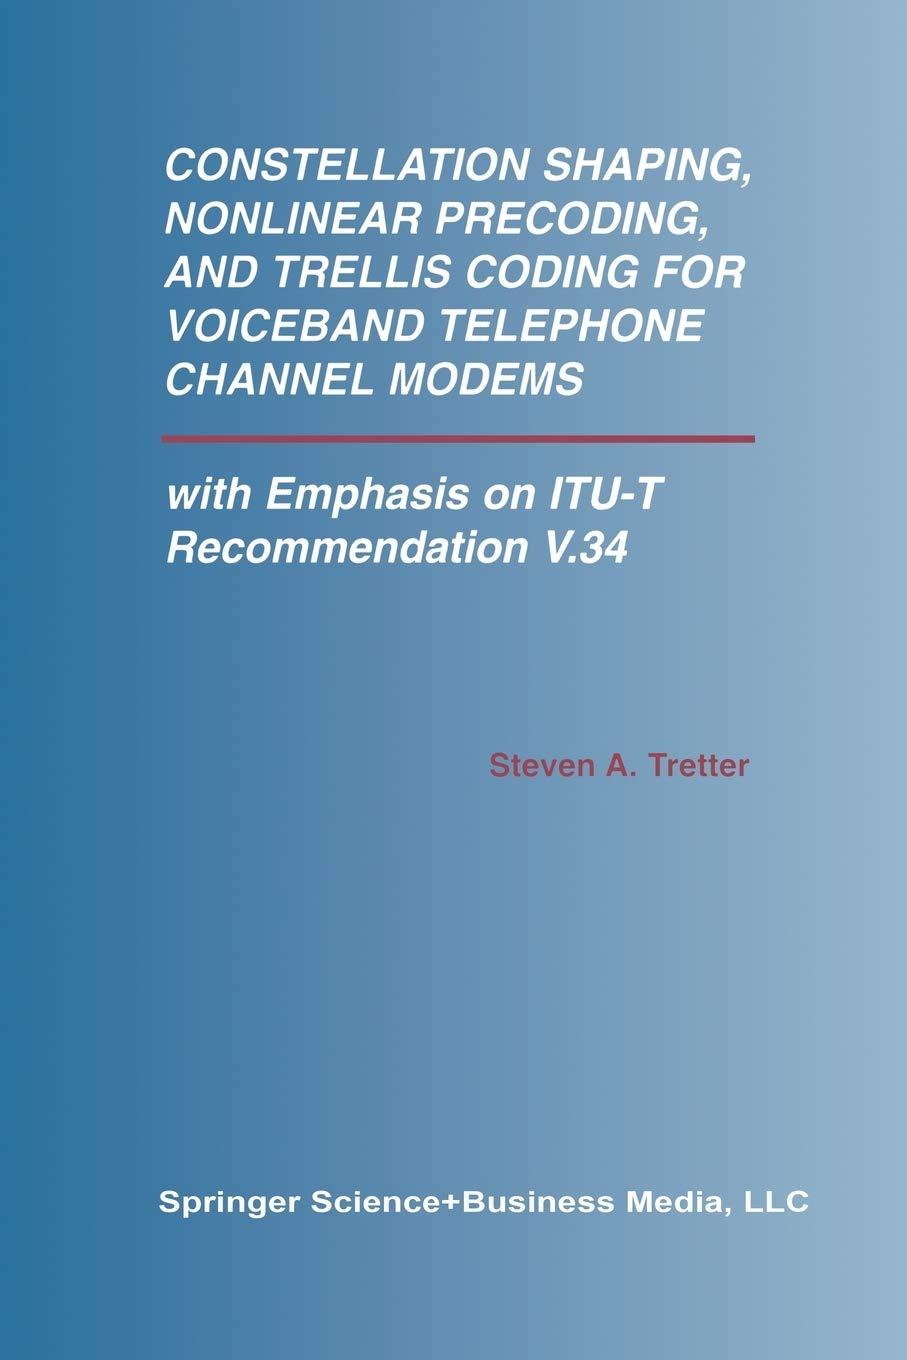 constellation shaping nonlinear precoding and trellis coding for voiceband telephone channel modems 2002